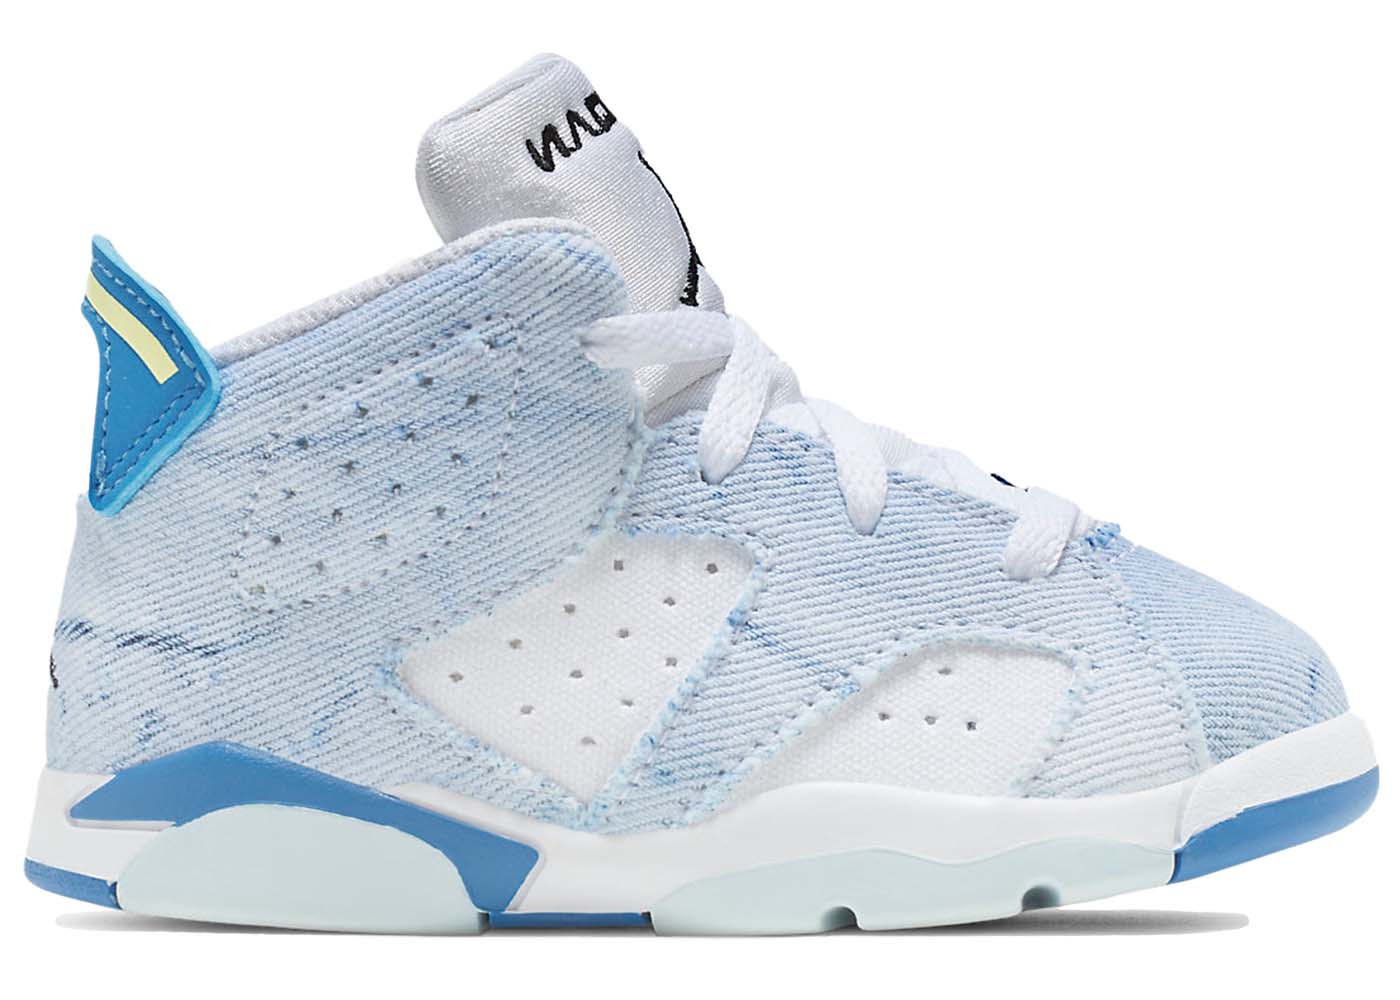 Air Jordan 6 Washed Denim Coming With Full Family Size - Fastsole